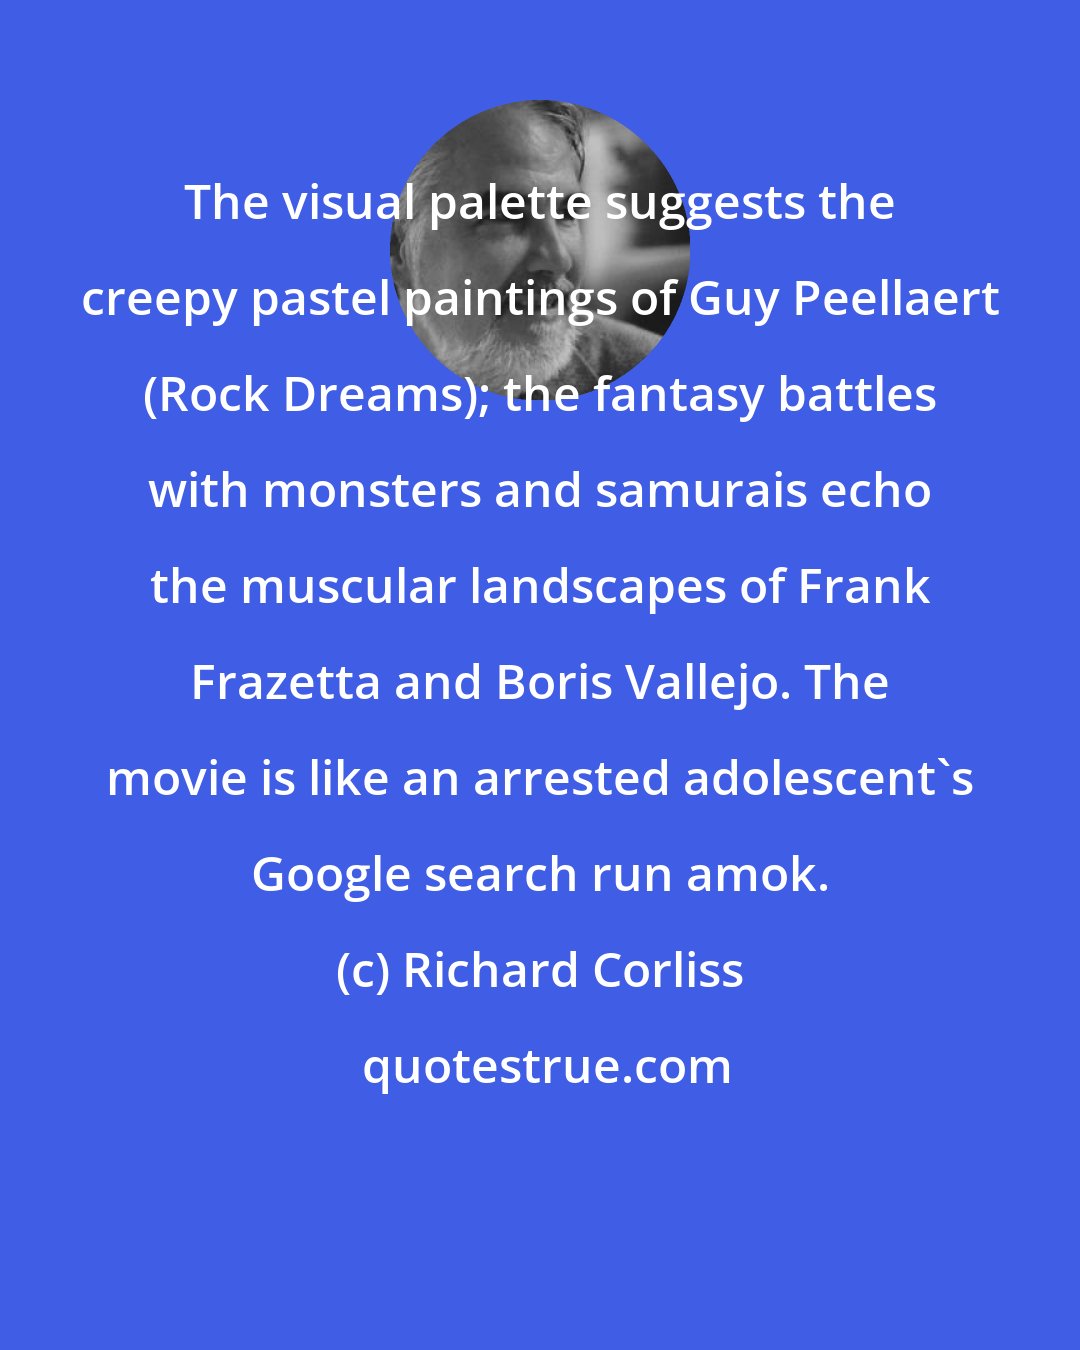 Richard Corliss: The visual palette suggests the creepy pastel paintings of Guy Peellaert (Rock Dreams); the fantasy battles with monsters and samurais echo the muscular landscapes of Frank Frazetta and Boris Vallejo. The movie is like an arrested adolescent's Google search run amok.